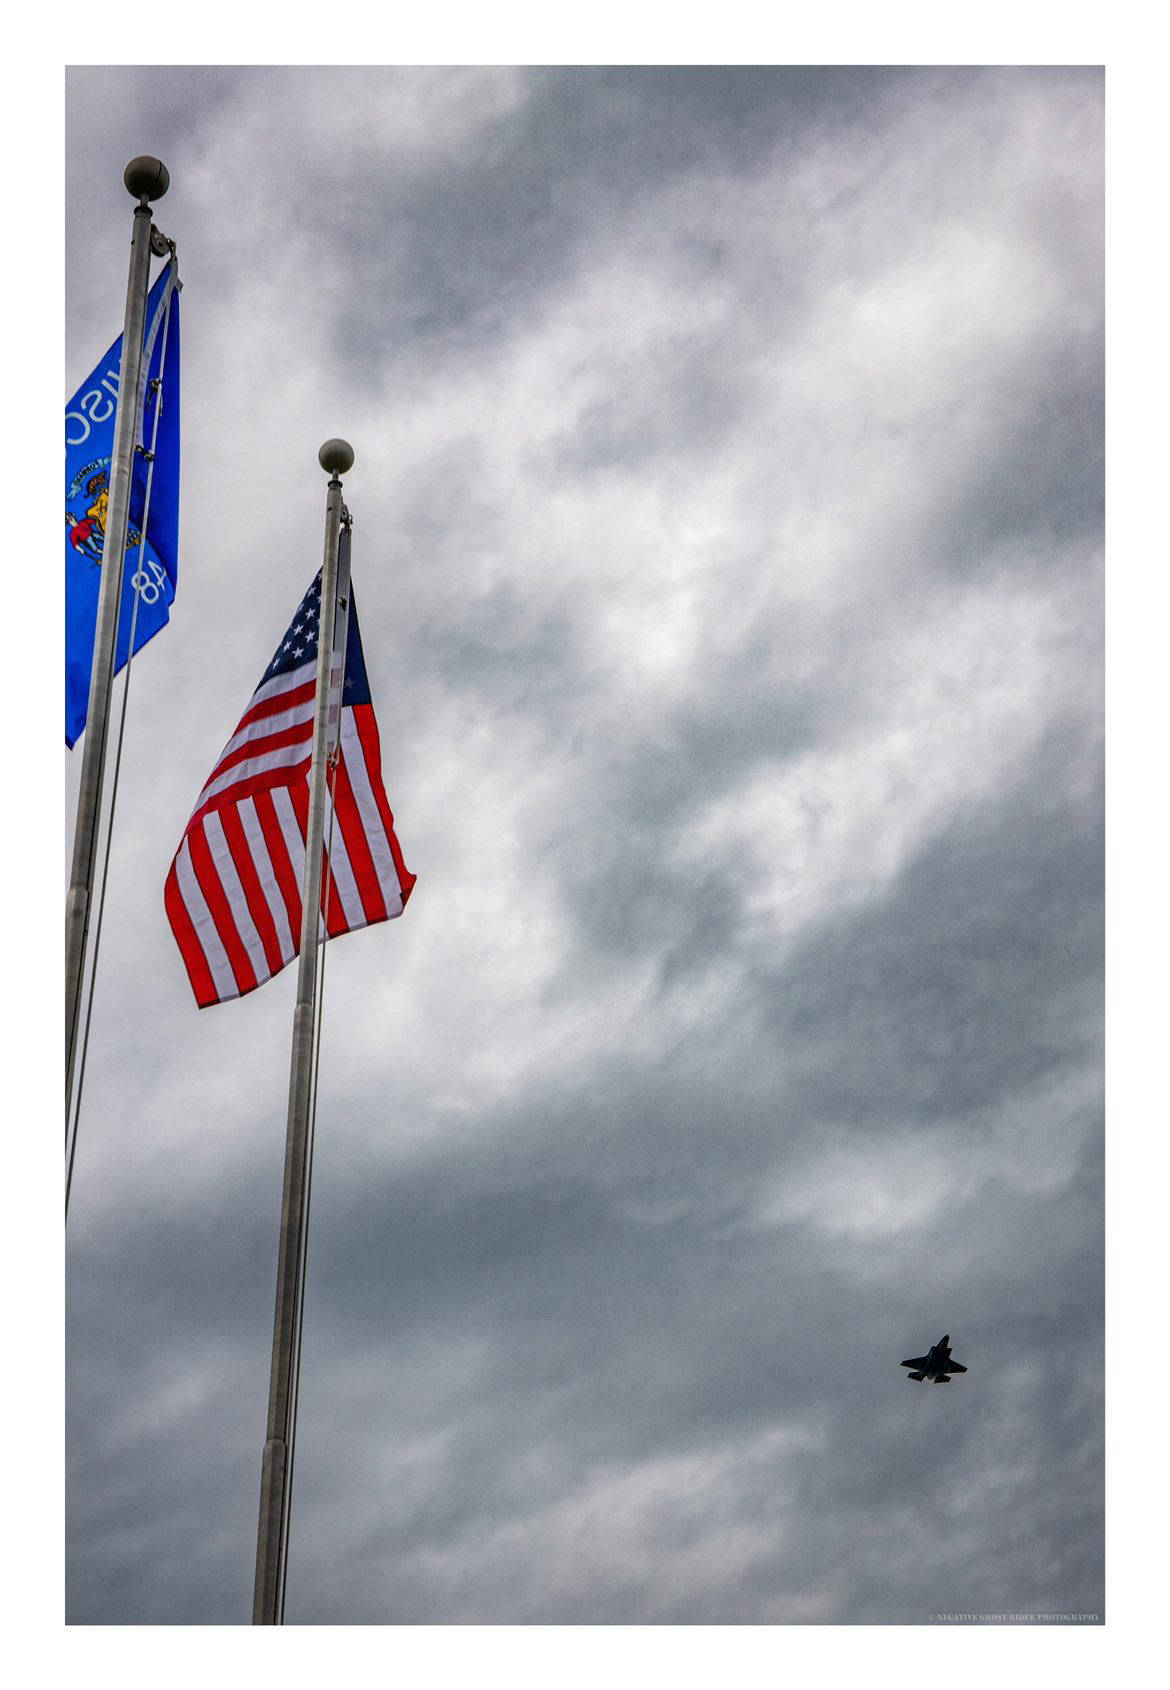 F35 flyover photo submission for the 4th of July Photo Contest